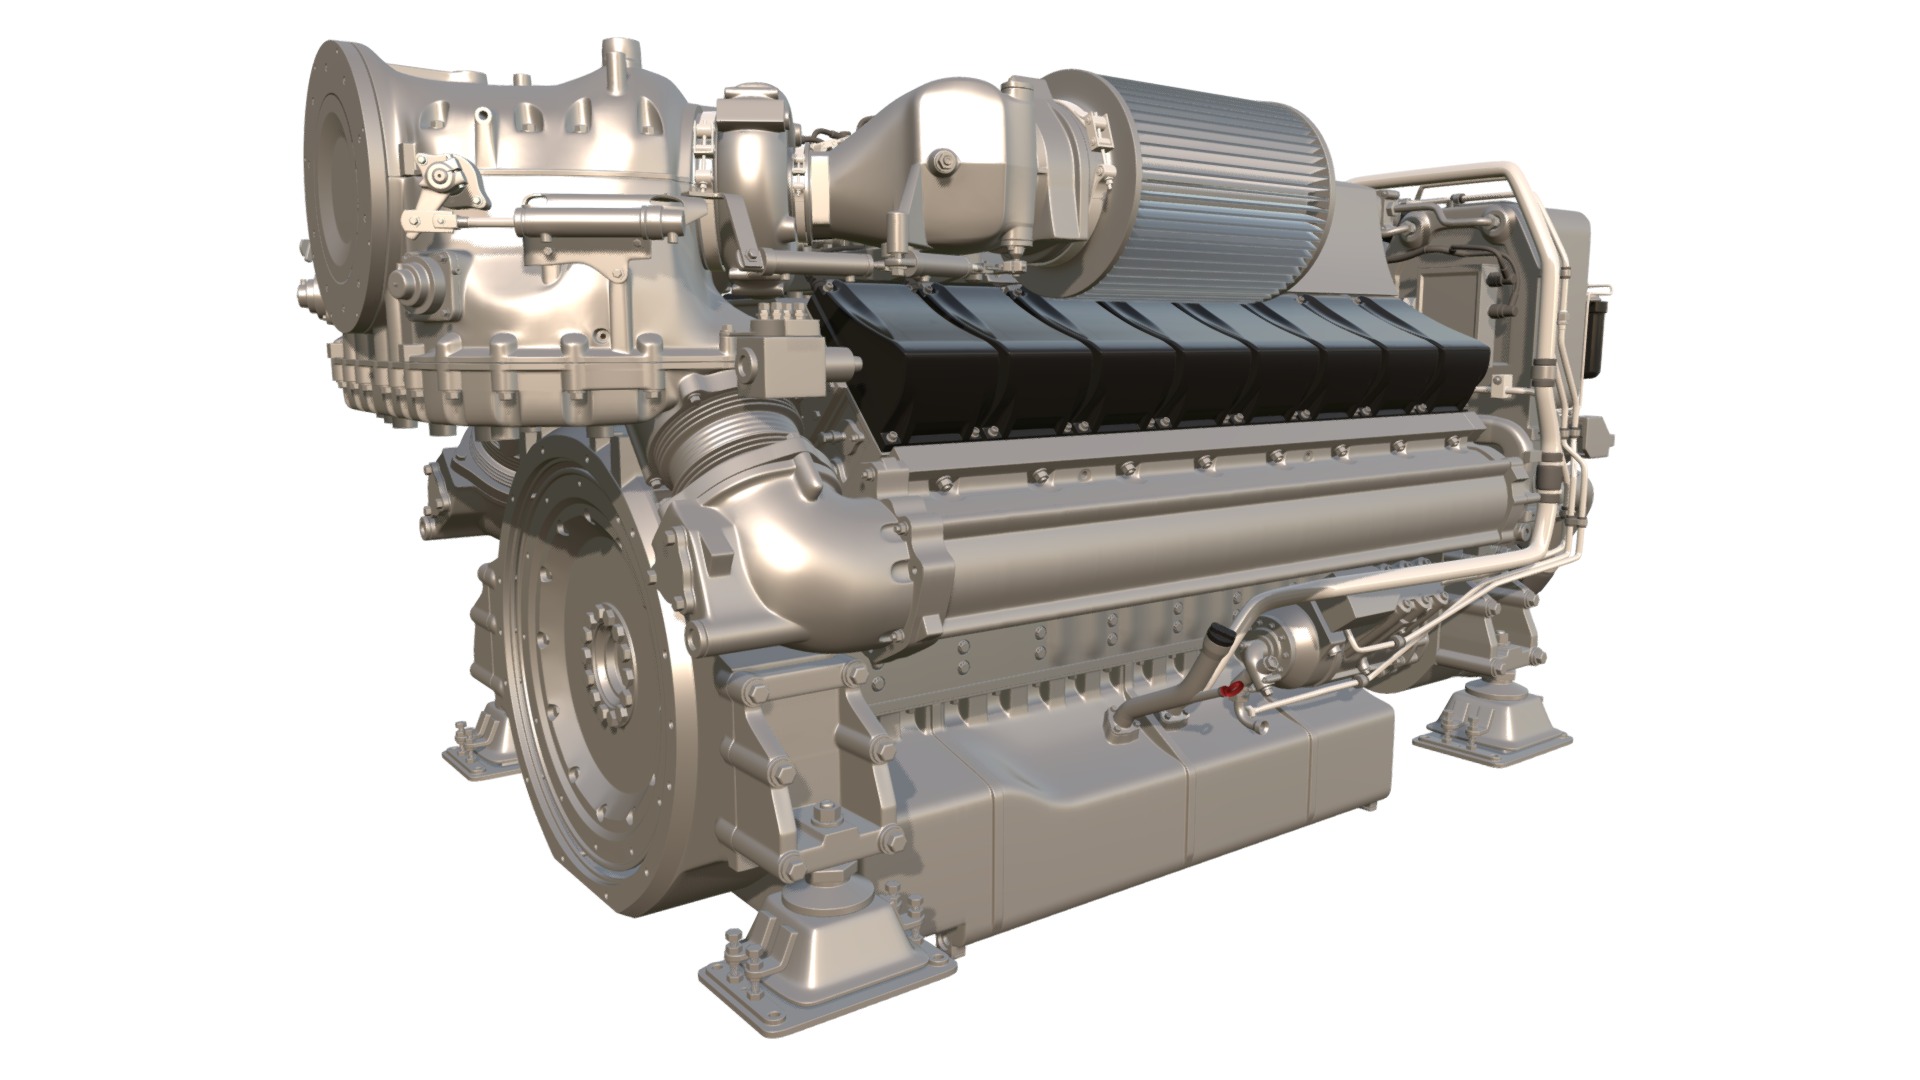 3D model Diesel Marine Engine - This is a 3D model of the Diesel Marine Engine. The 3D model is about a machine on the white cover.